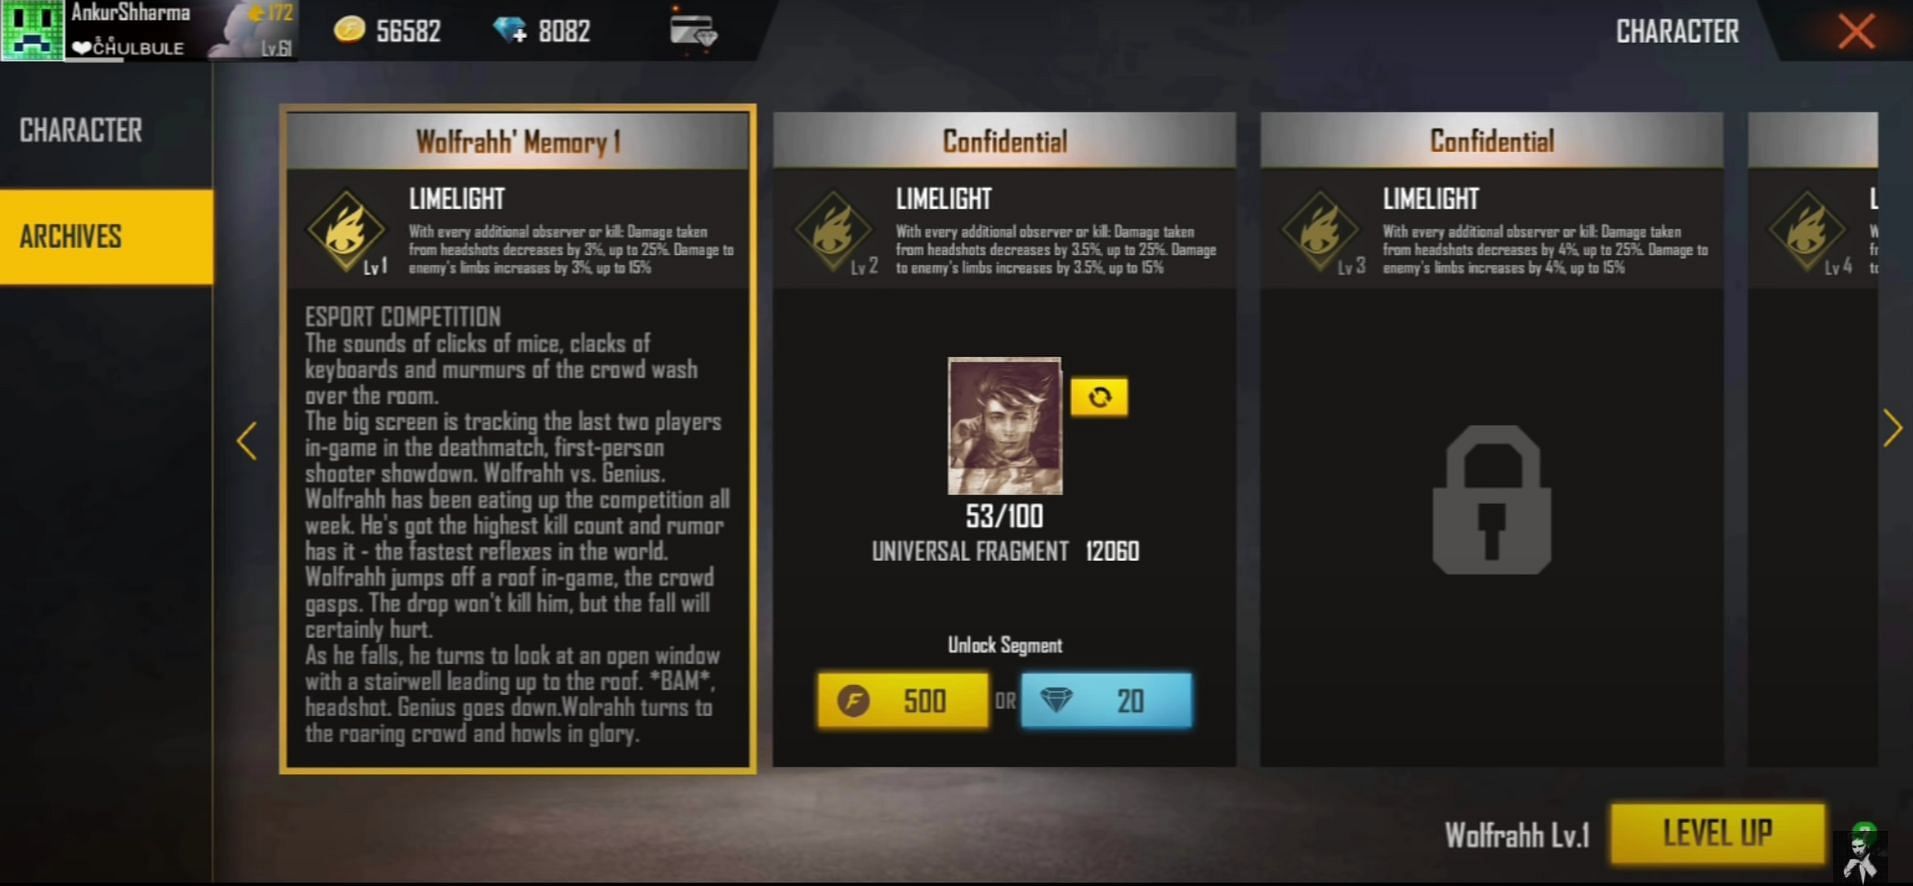 Players can level up their character (Image via Ankur Sharma; YouTube)